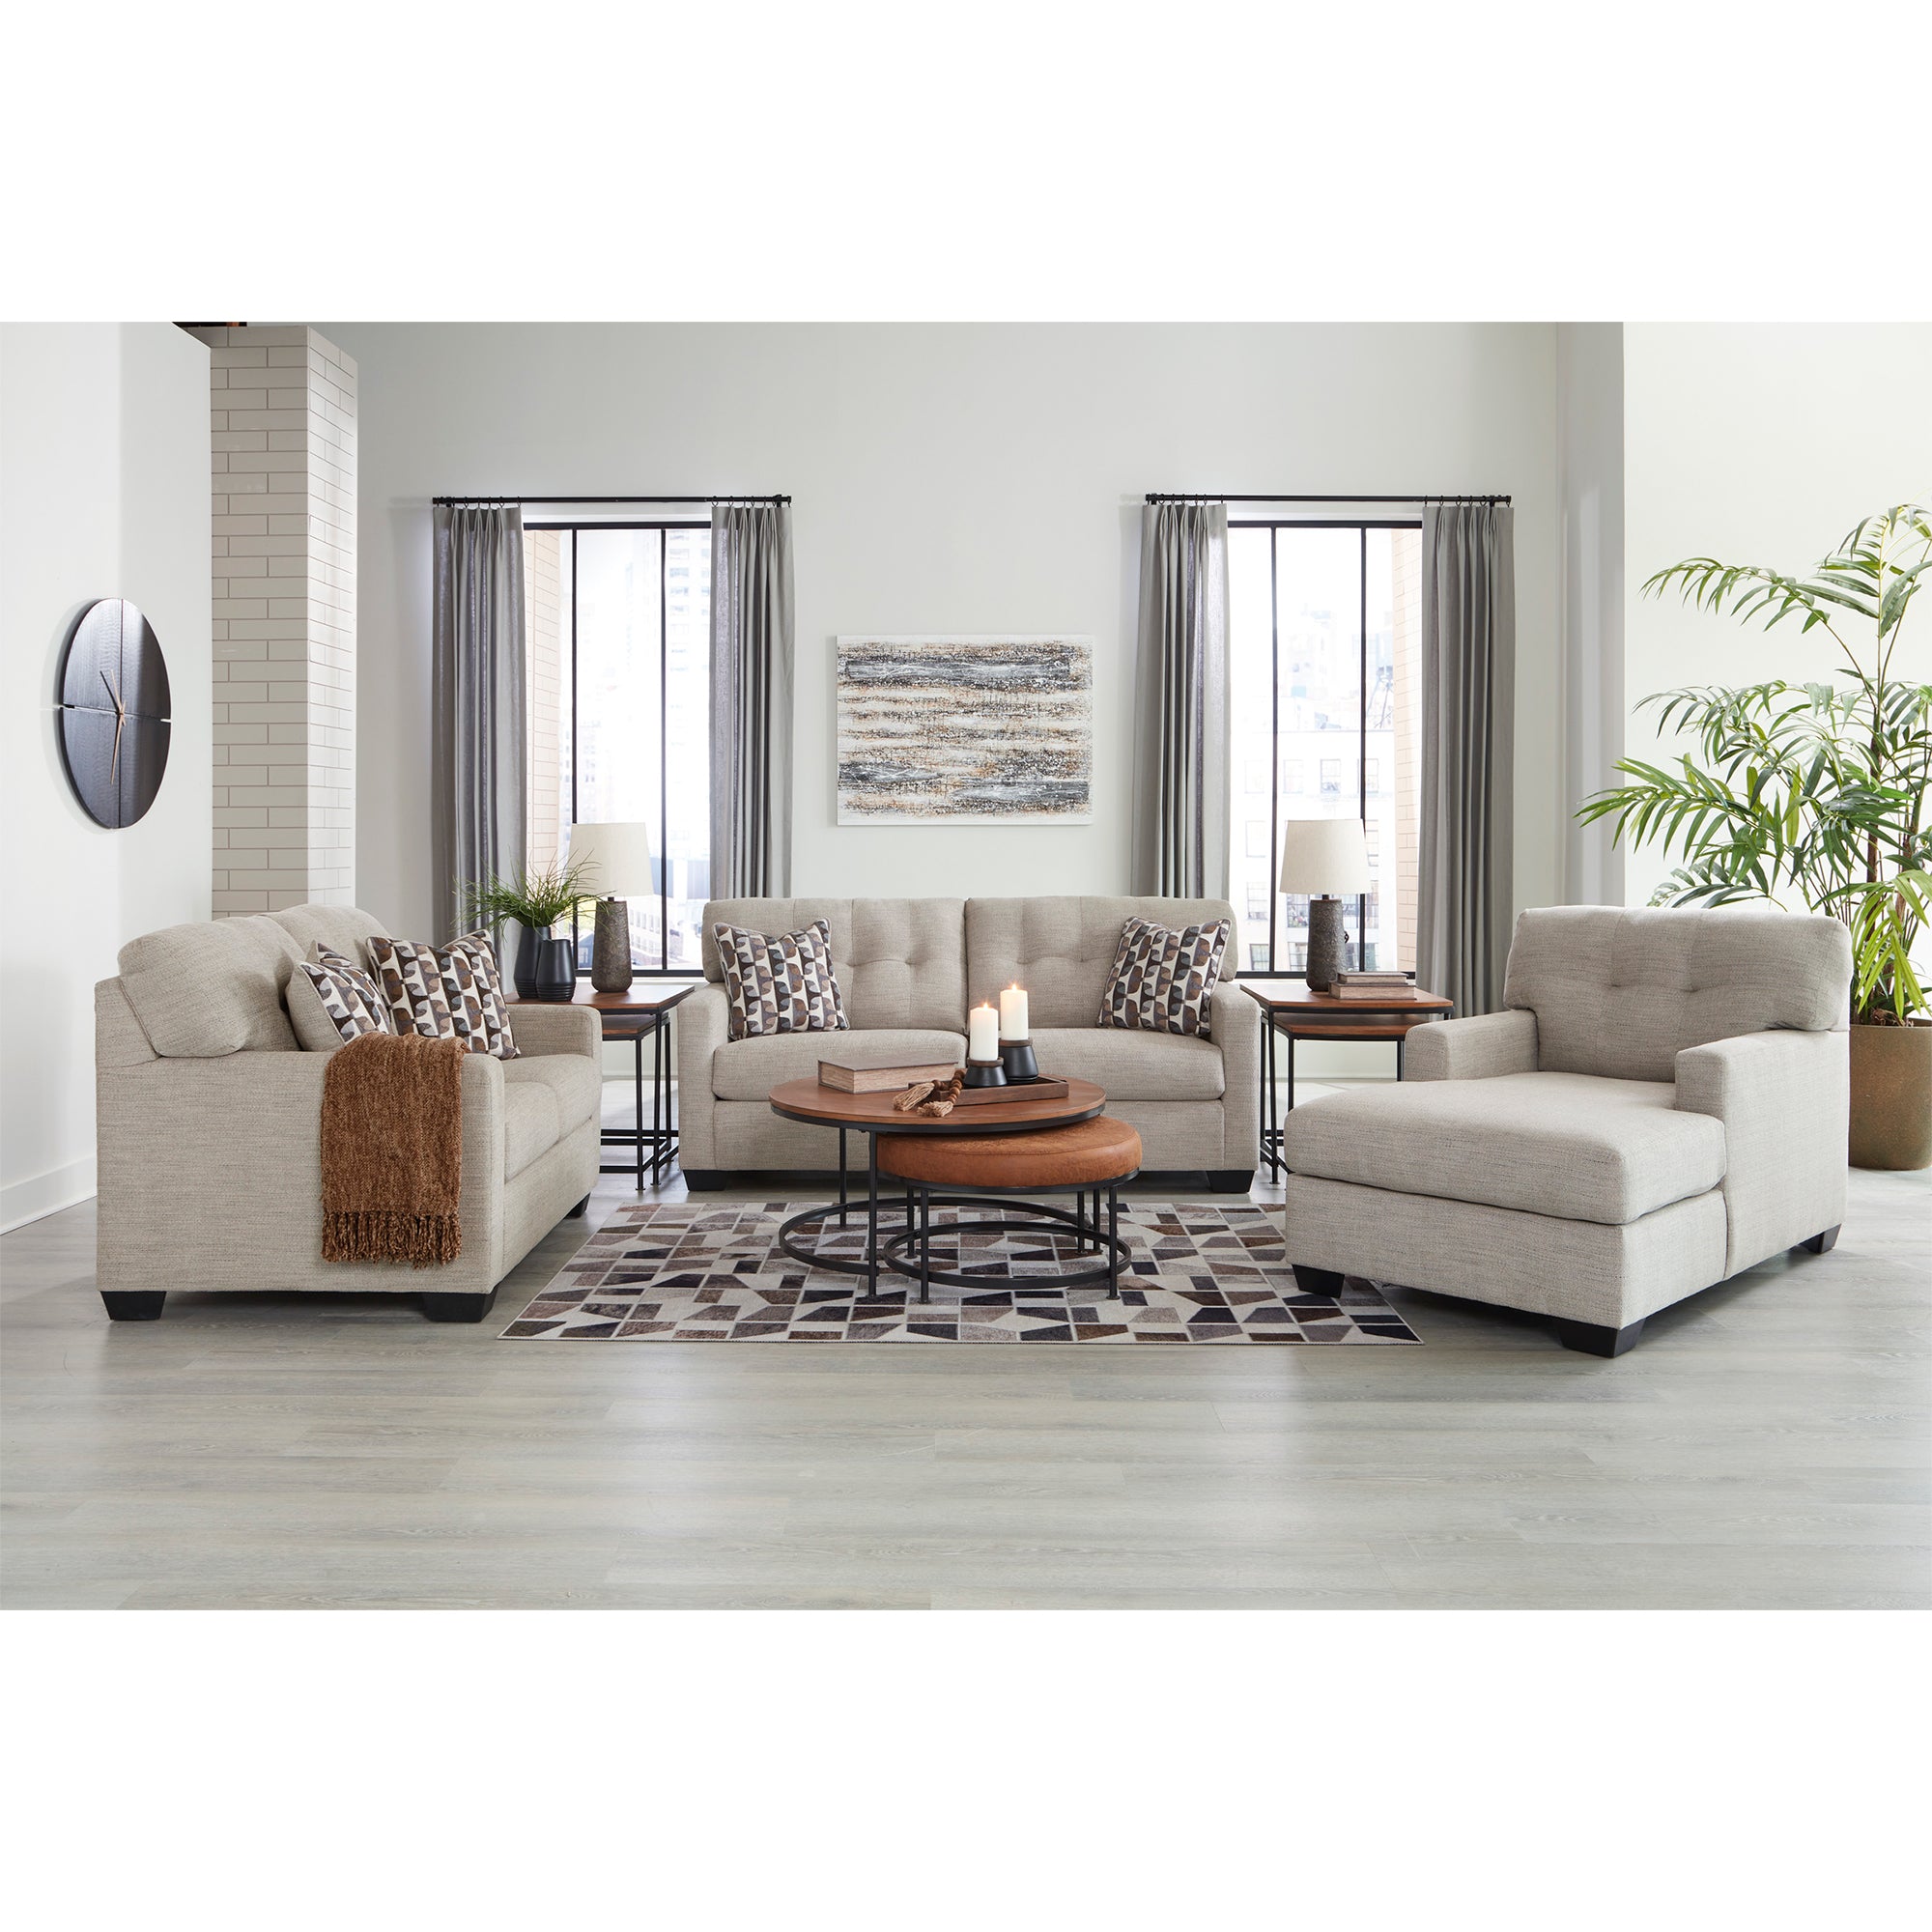 Cozy Mahoney Sofa and Loveseat in pebble, designed for comfort and style in Milwaukee living rooms